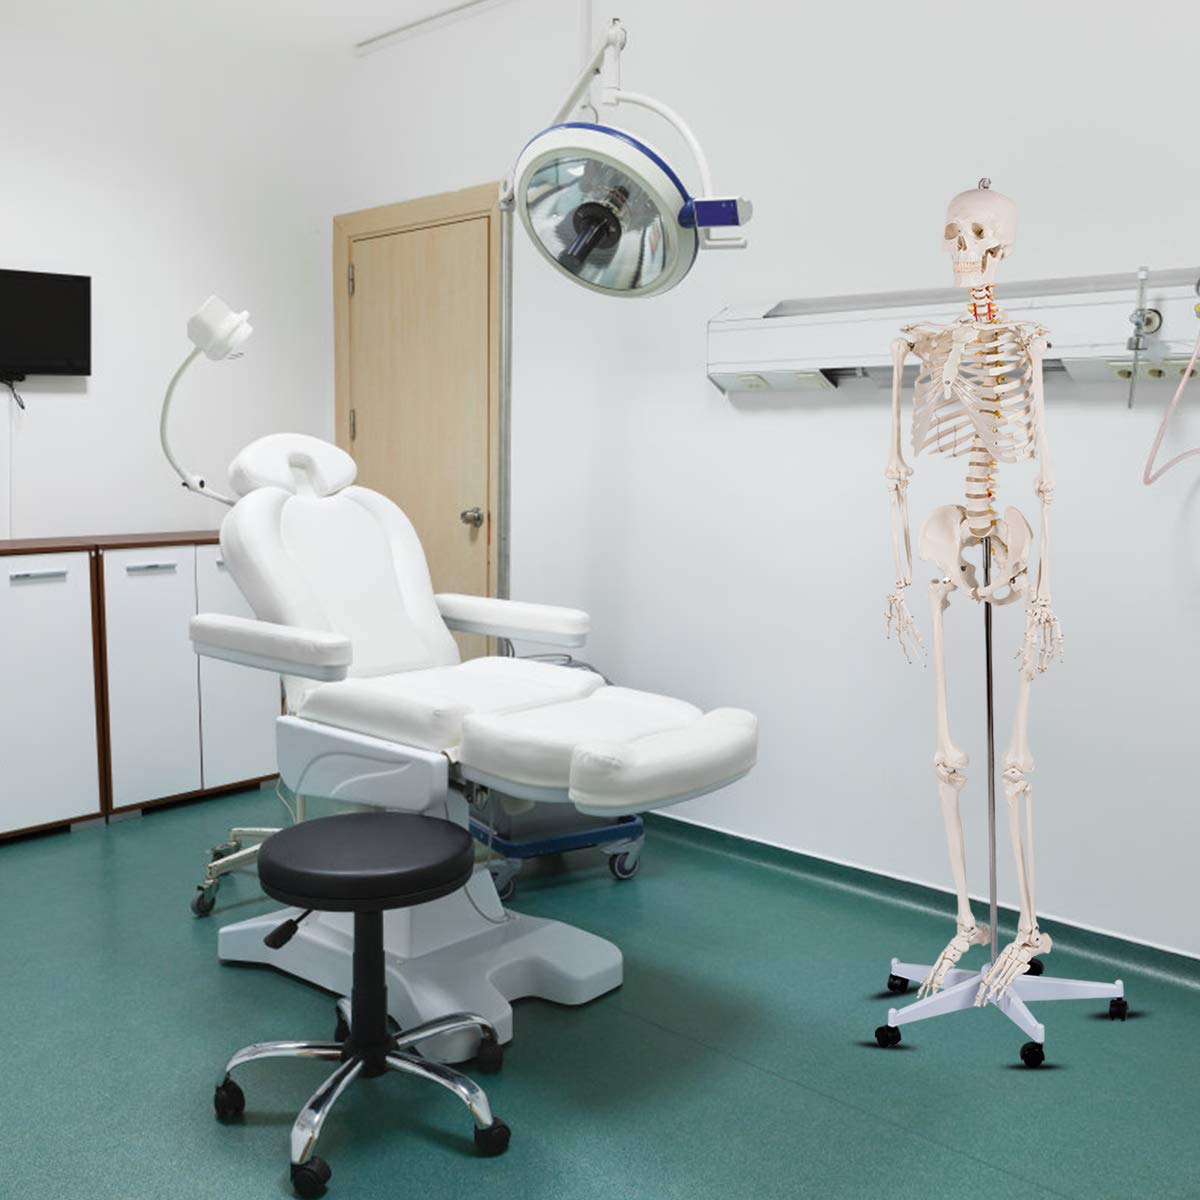 Giantex 70.8" Life Size Skeleton Model, with Roller Stand, 2 Casters with Brake, Removable Parts, Anatomical Poster and Dust Cover